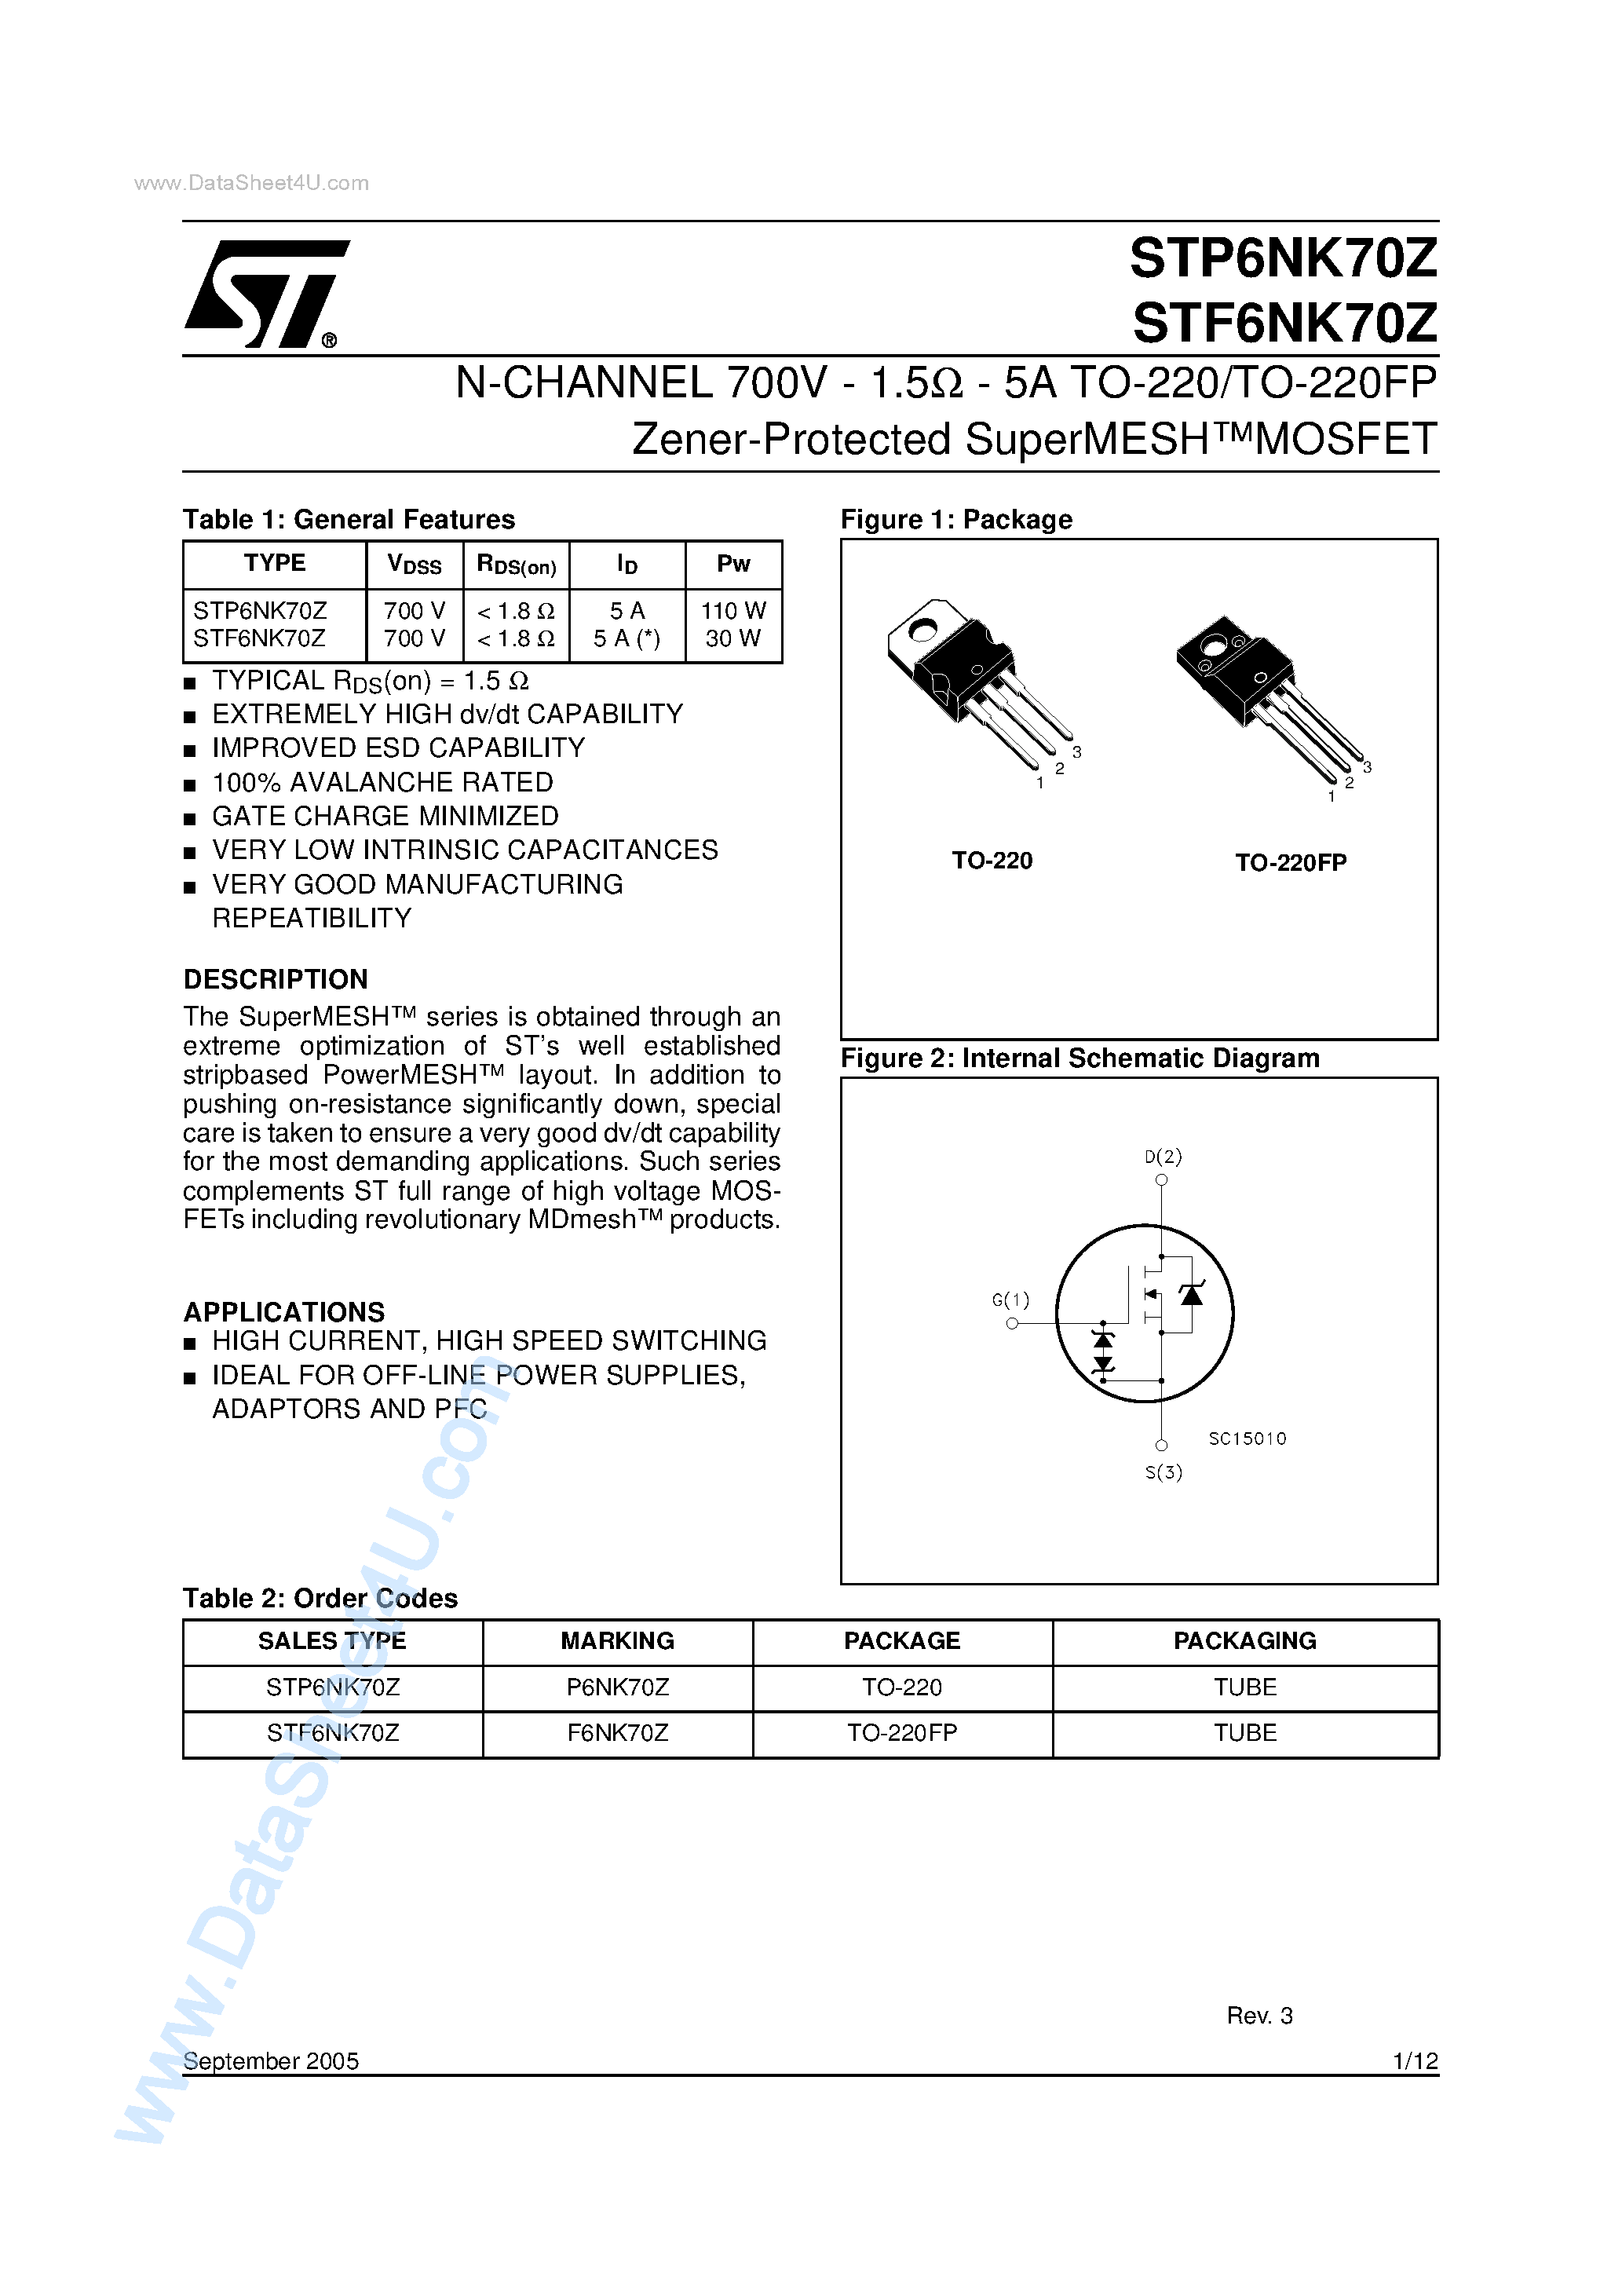 Datasheet STP6NK70Z - N-CHANNEL MOSFET page 1